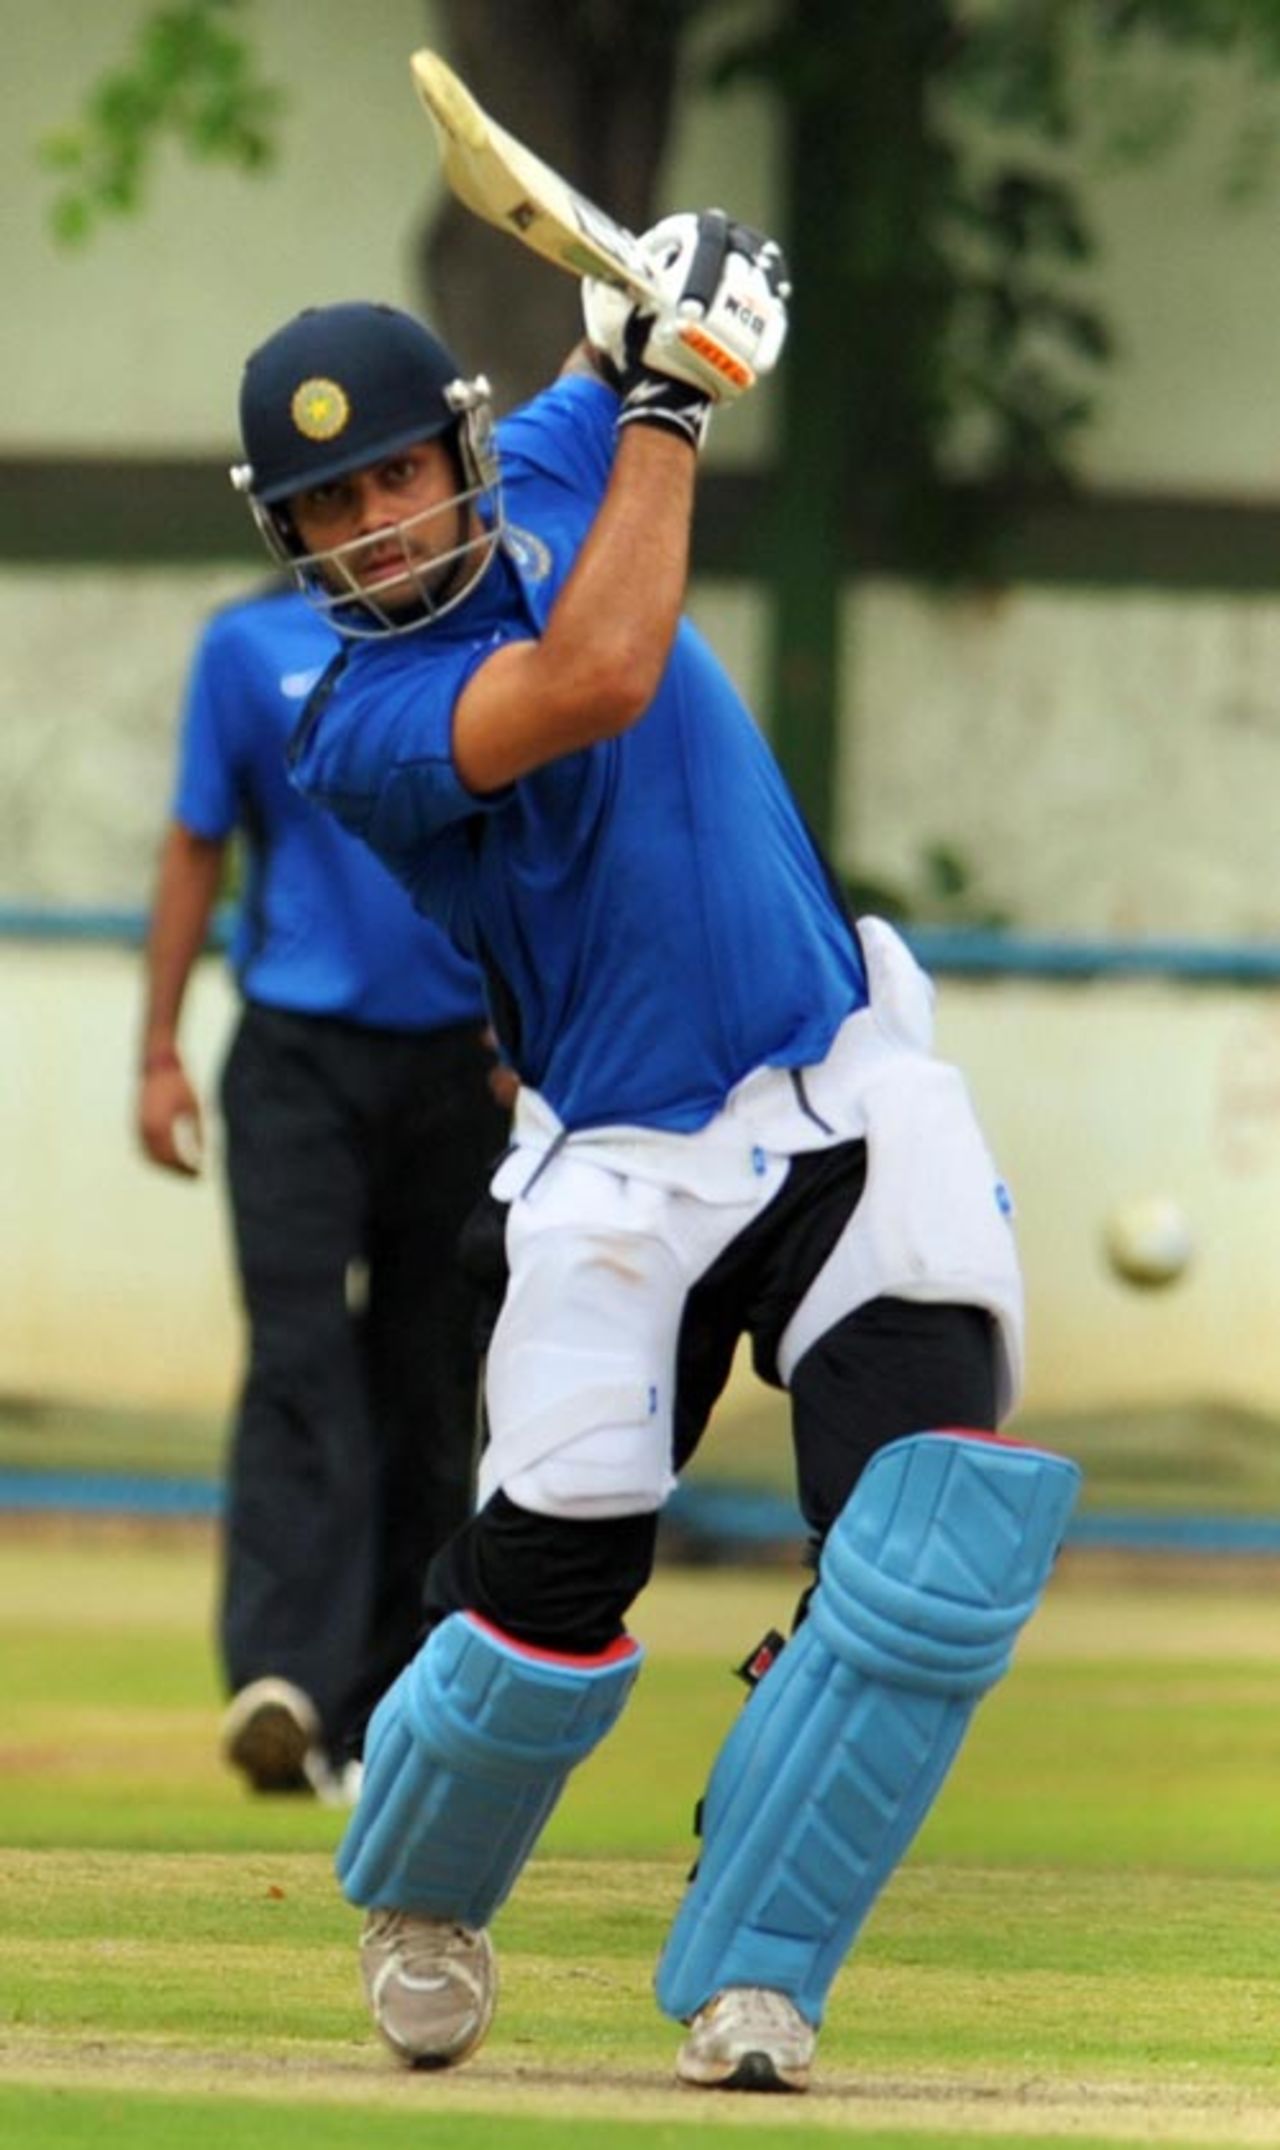 Virat Kohli drives during a practice session ahead of the Emerging Players' tournament, National Cricket Academy, Bangalore, July 15, 2009